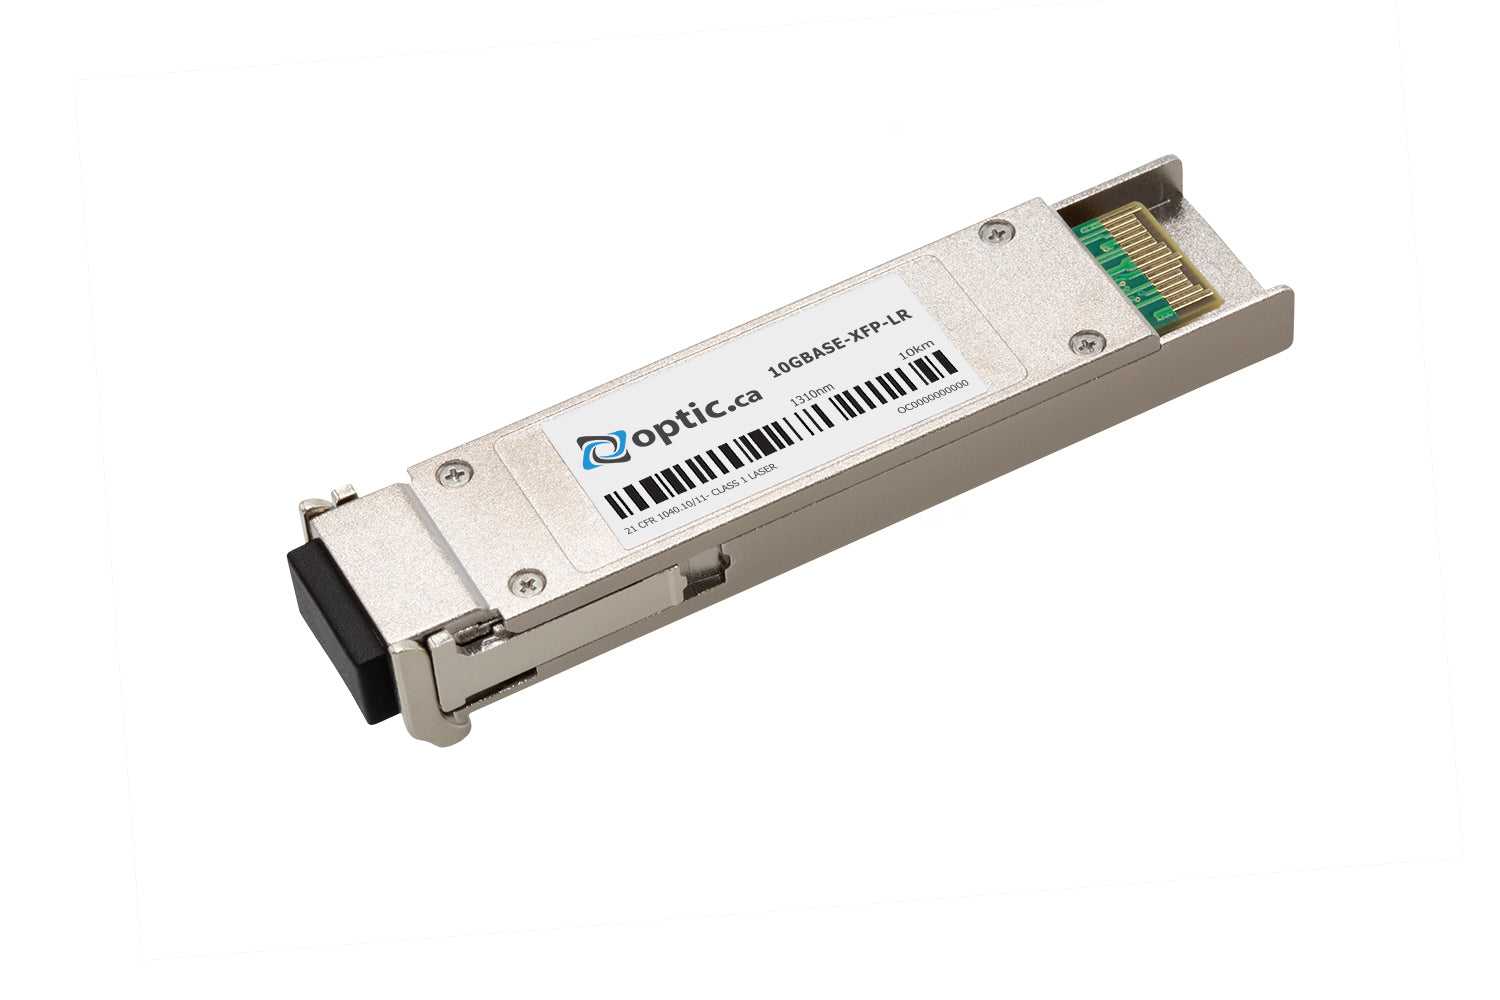 OPTIC.CA - 10GBASE-LR XFP - ONS-XC-10G-S1-OC - CISCO COMPATIBLE